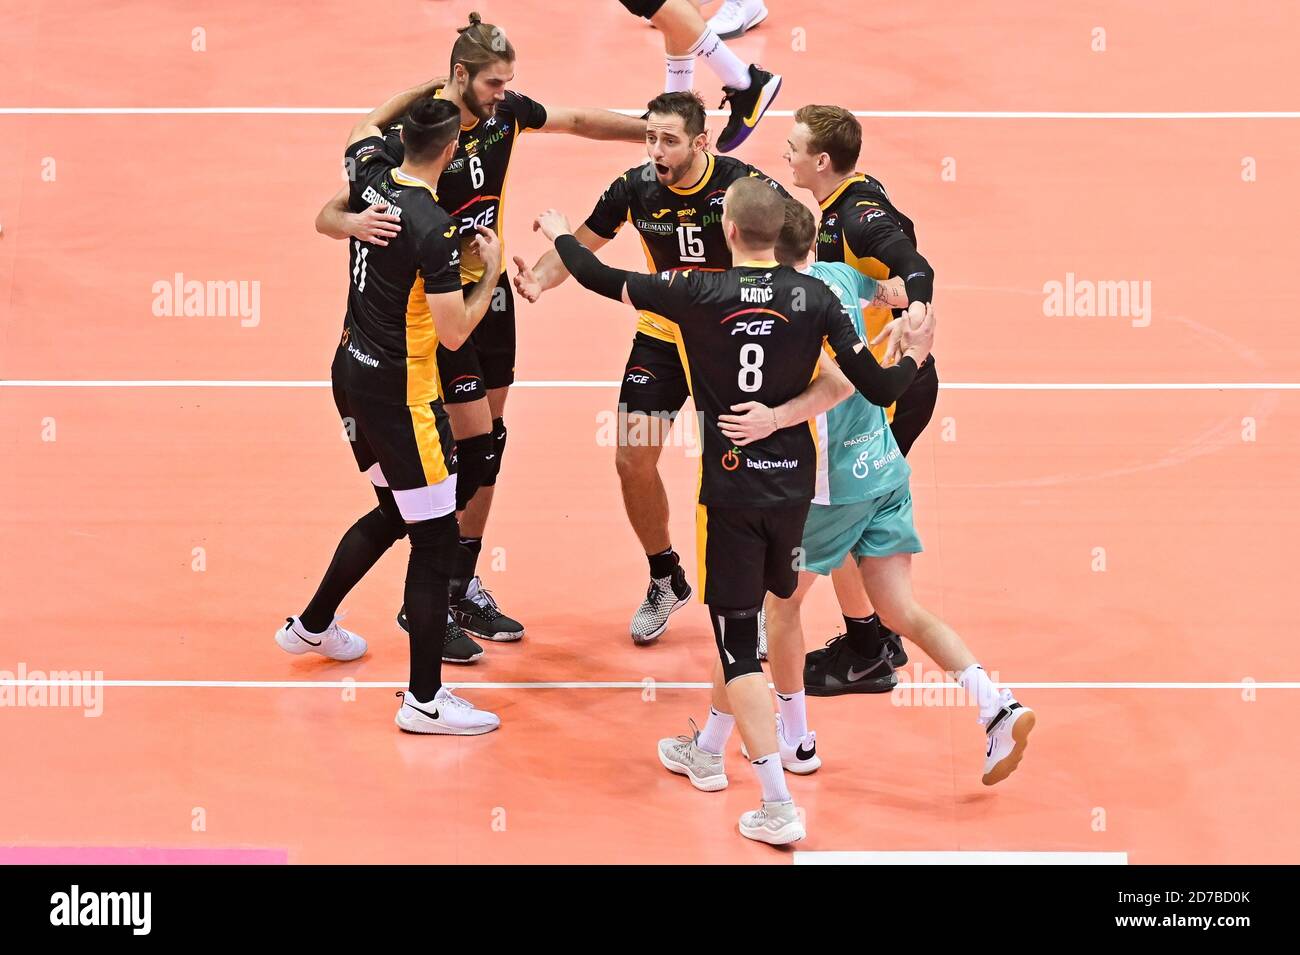 Karol Klos and Grzegorz Lomacz in action during the Plus Liga match between Trefl Gdansk and PGE Skra Belchatow at Ergo Arena stadium.(Final score: Trefl Gdansk 1:3 PGE Skra Belchatow) Stock Photo